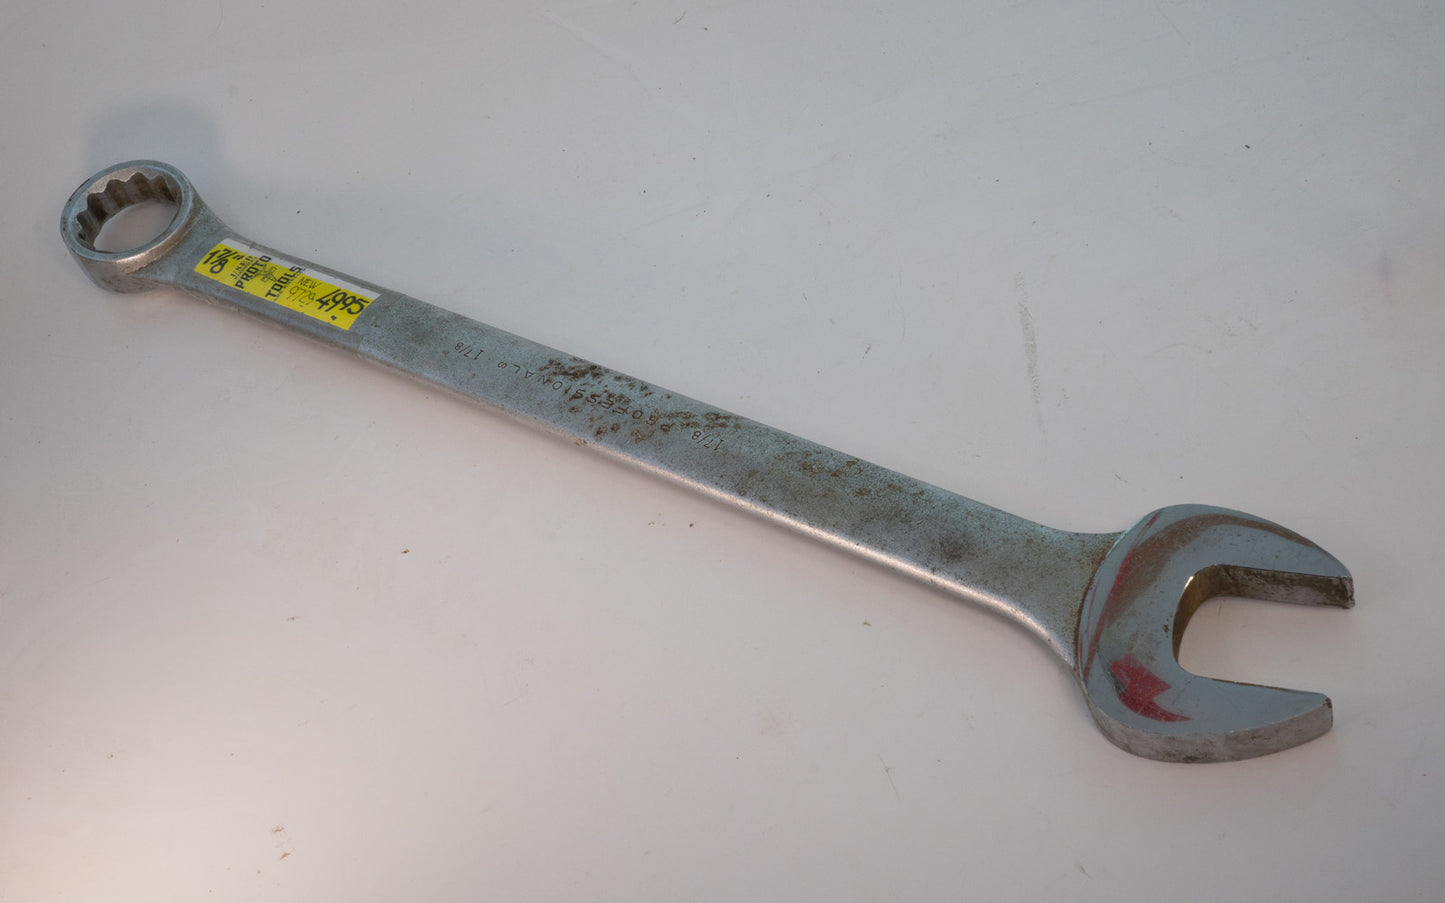 1-7/8" Proto Tools Combo Wrench. Large Combination Wrench